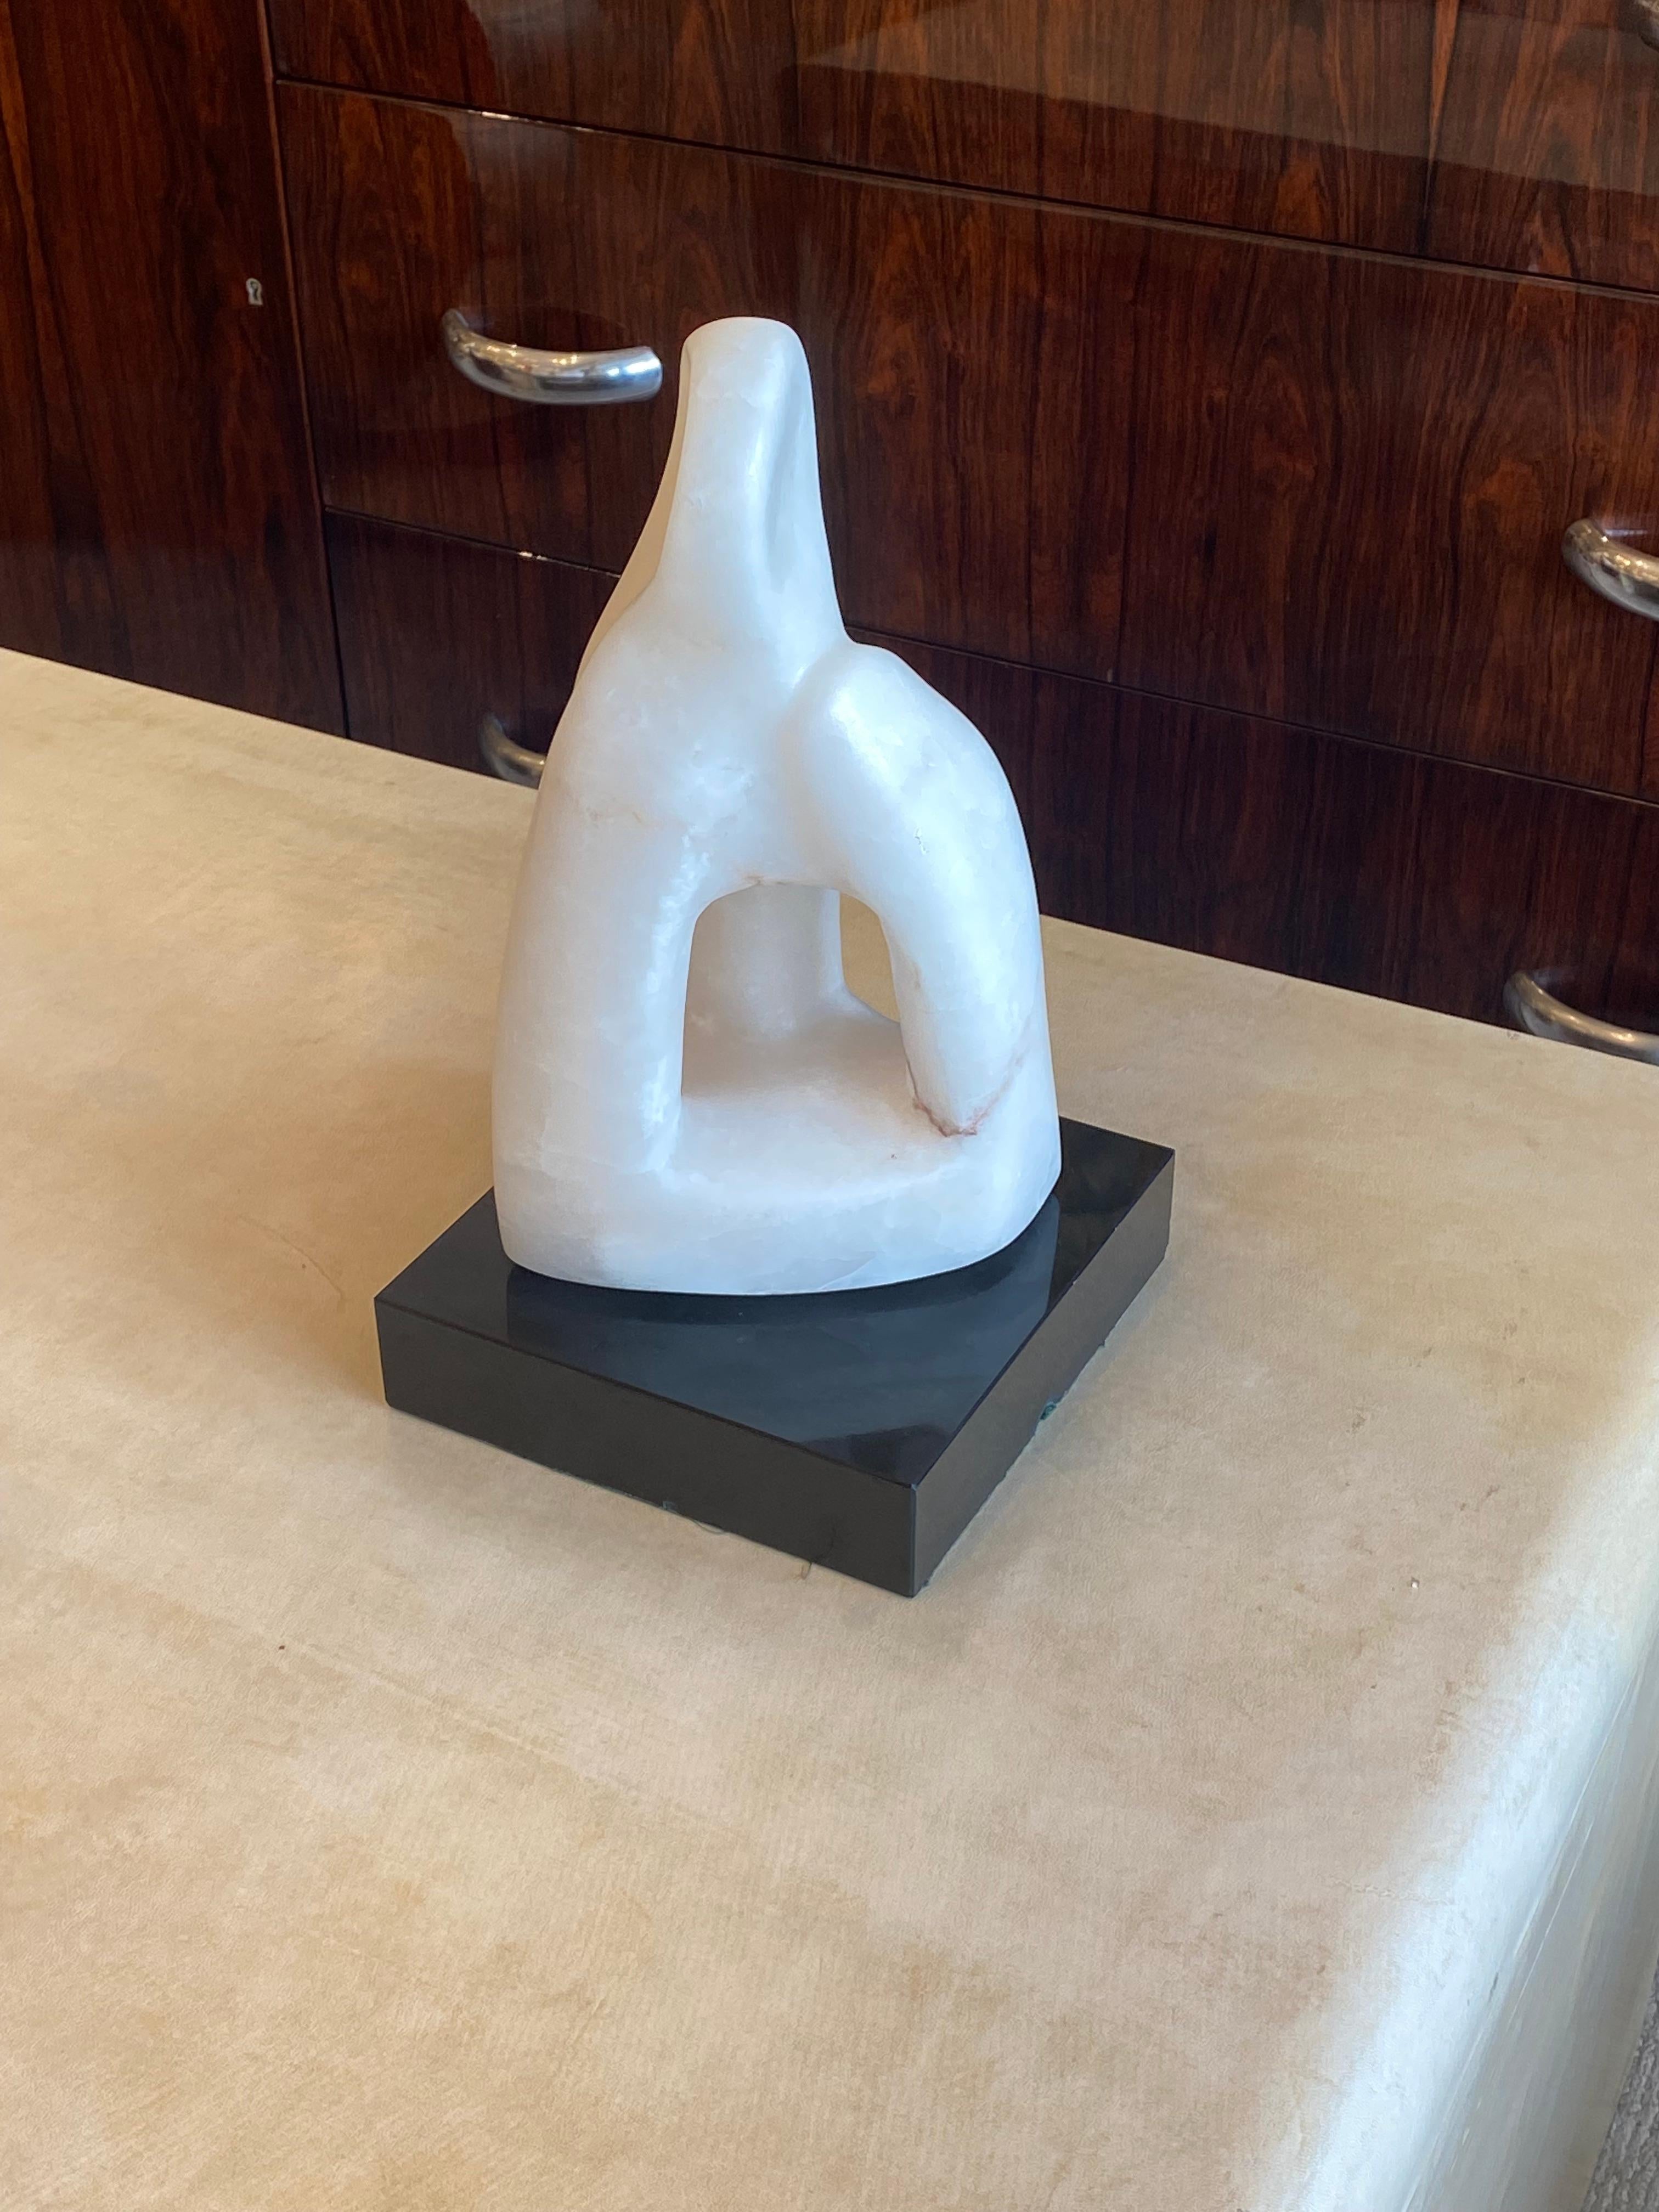 A gorgeous black and white abstract sculpture in Alabaster and Marble.
Made in France.